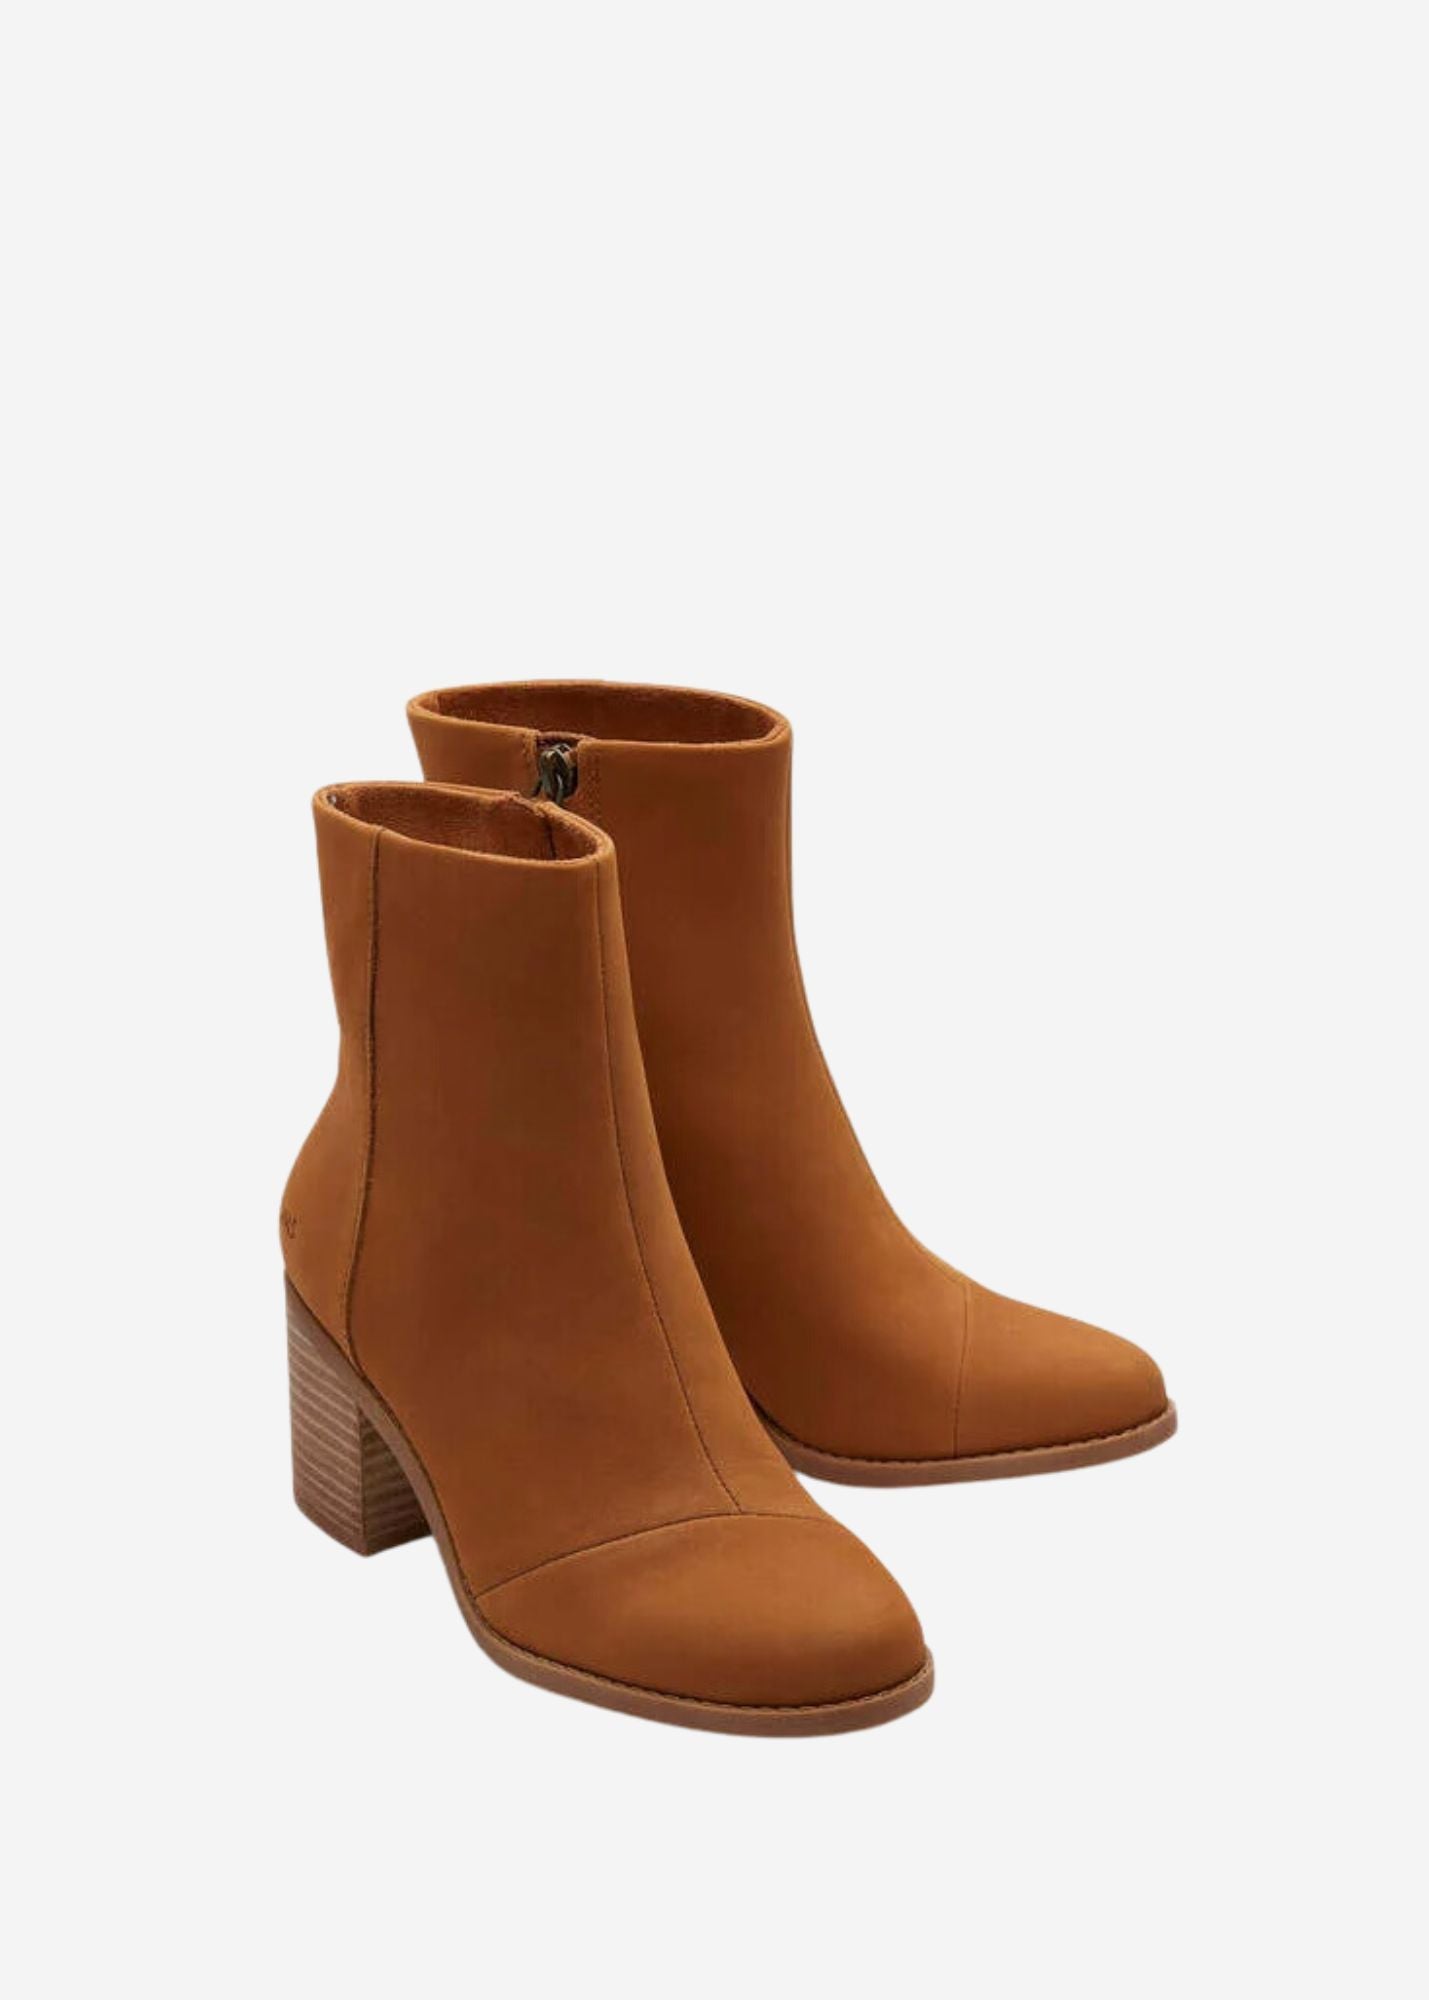 Ankle Boots for Women High Heel Boots Chunky Heeled India | Ubuy